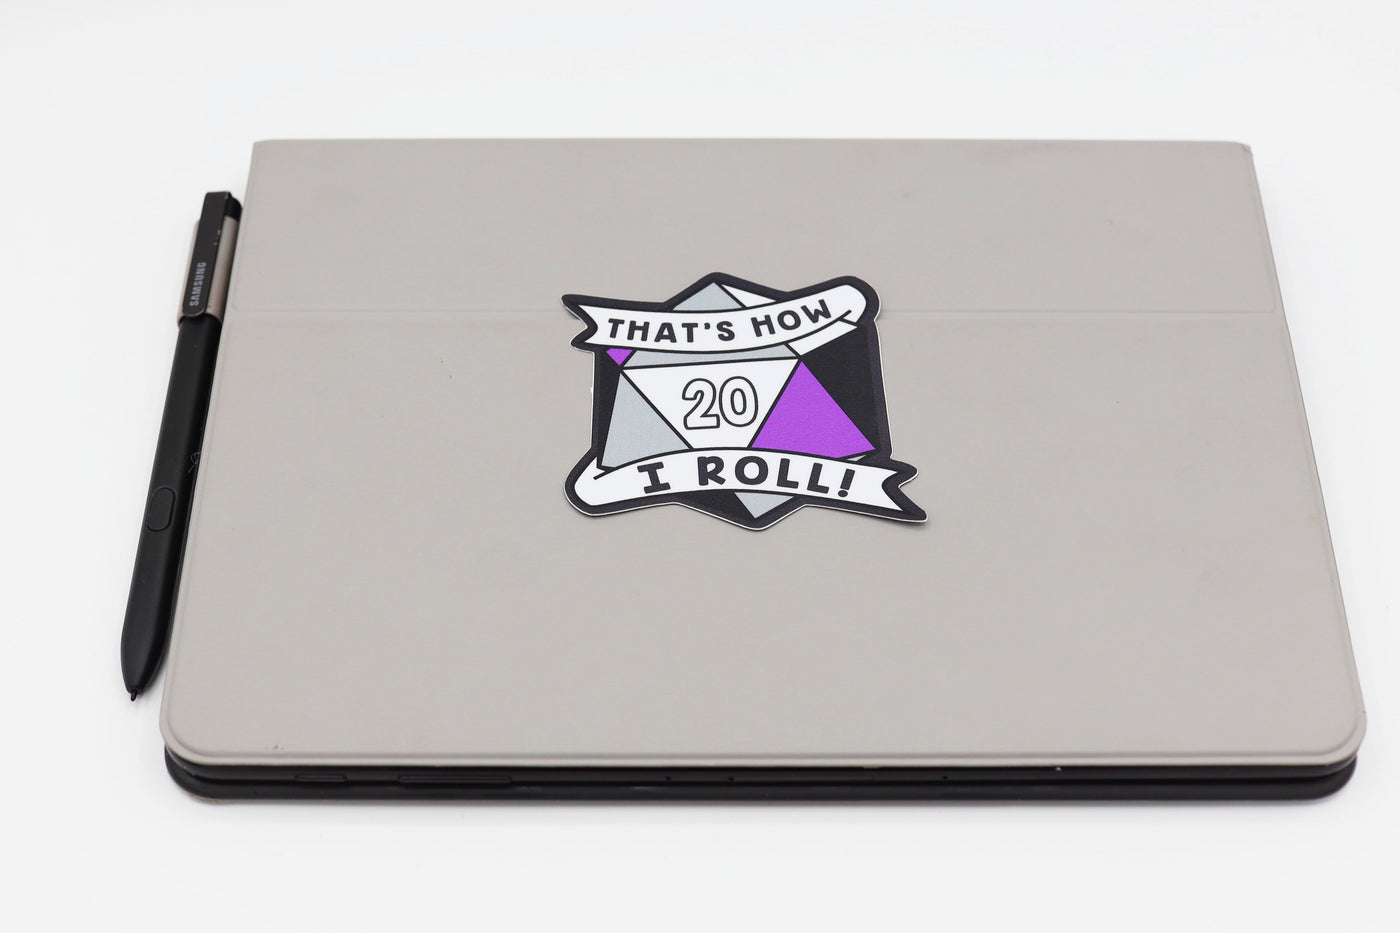 That's How I Roll Sticker - Asexual Pride Stickers Foam Brain Games